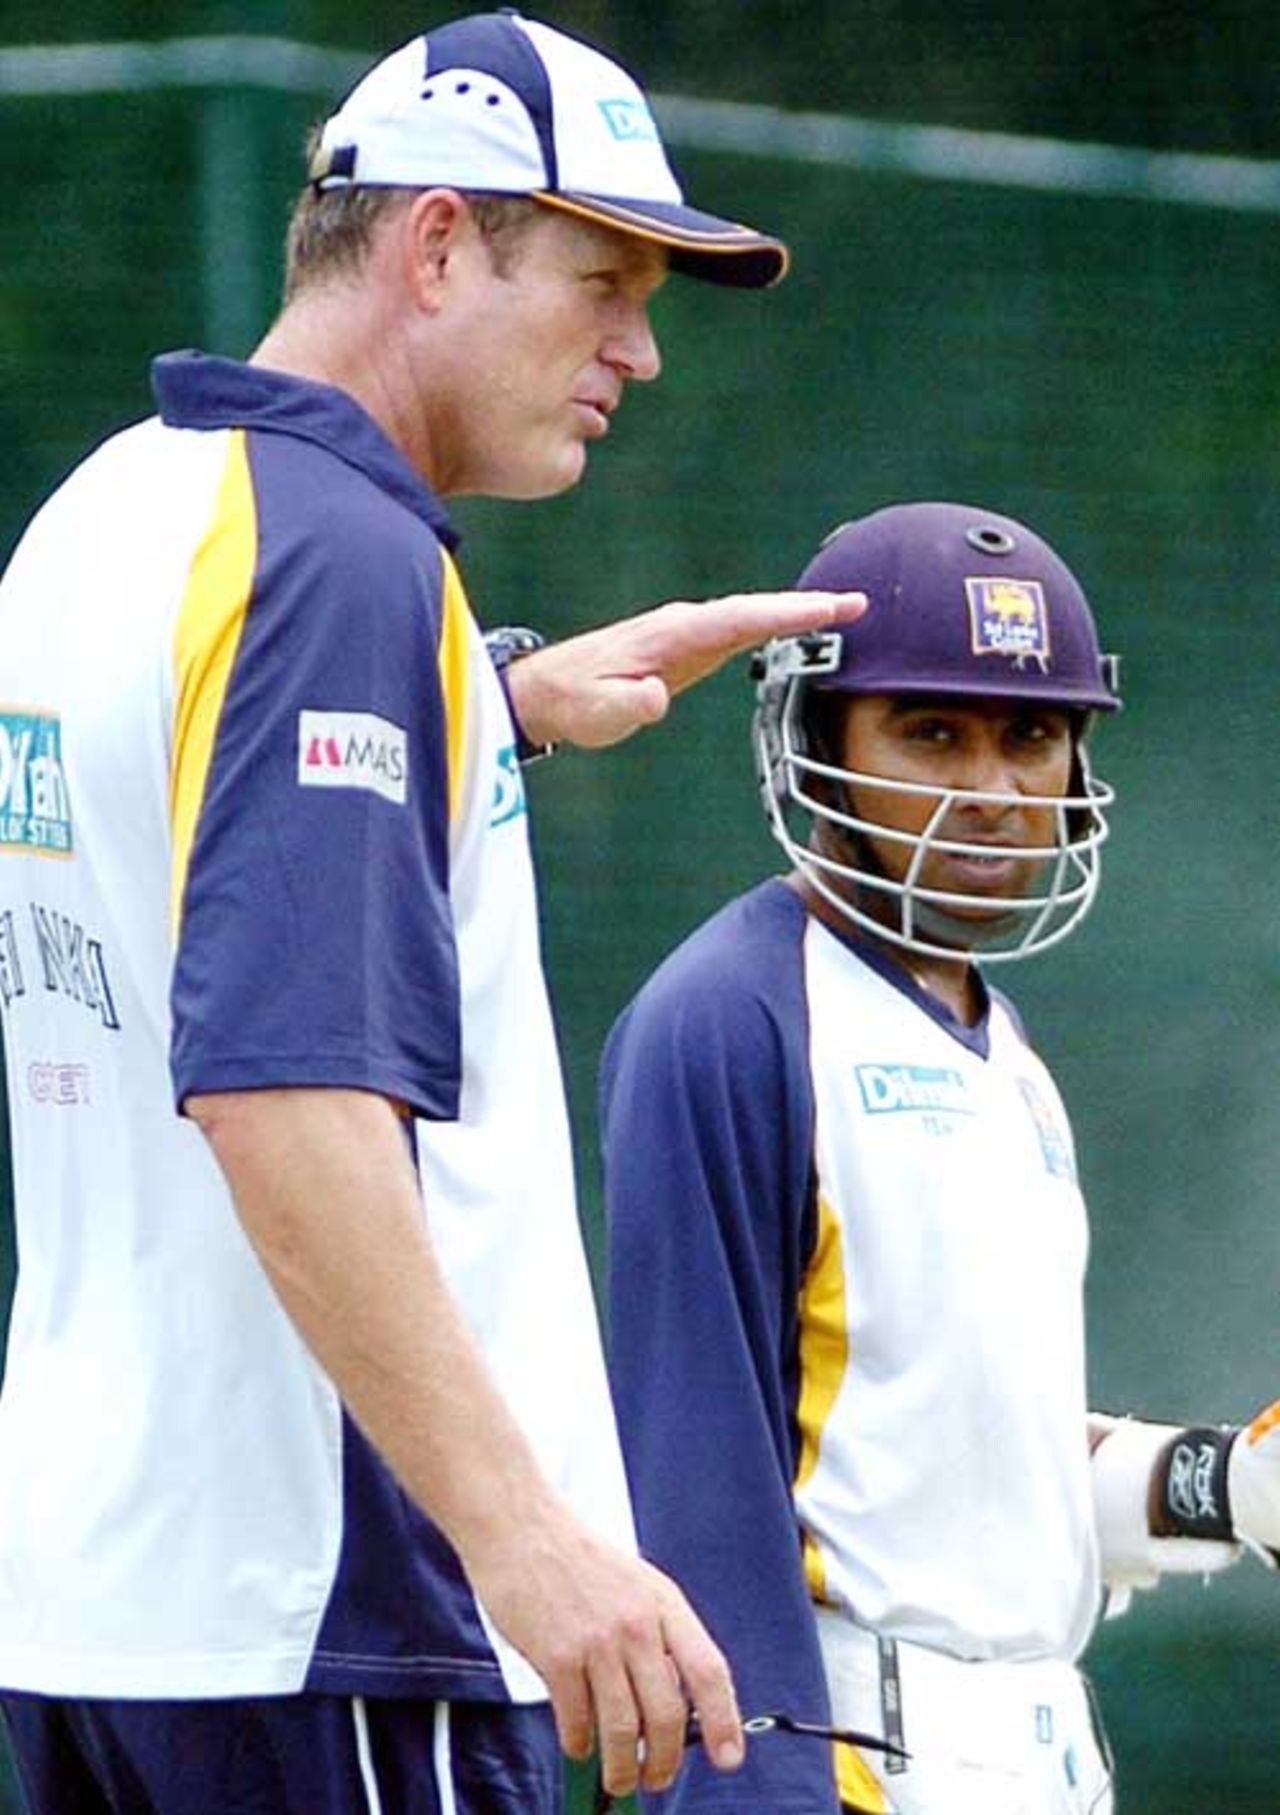 Tom Moody and Mahela Jayawardene in discussion during practice at the Nondescript Cricket Club in Colombo, May 14, 2007